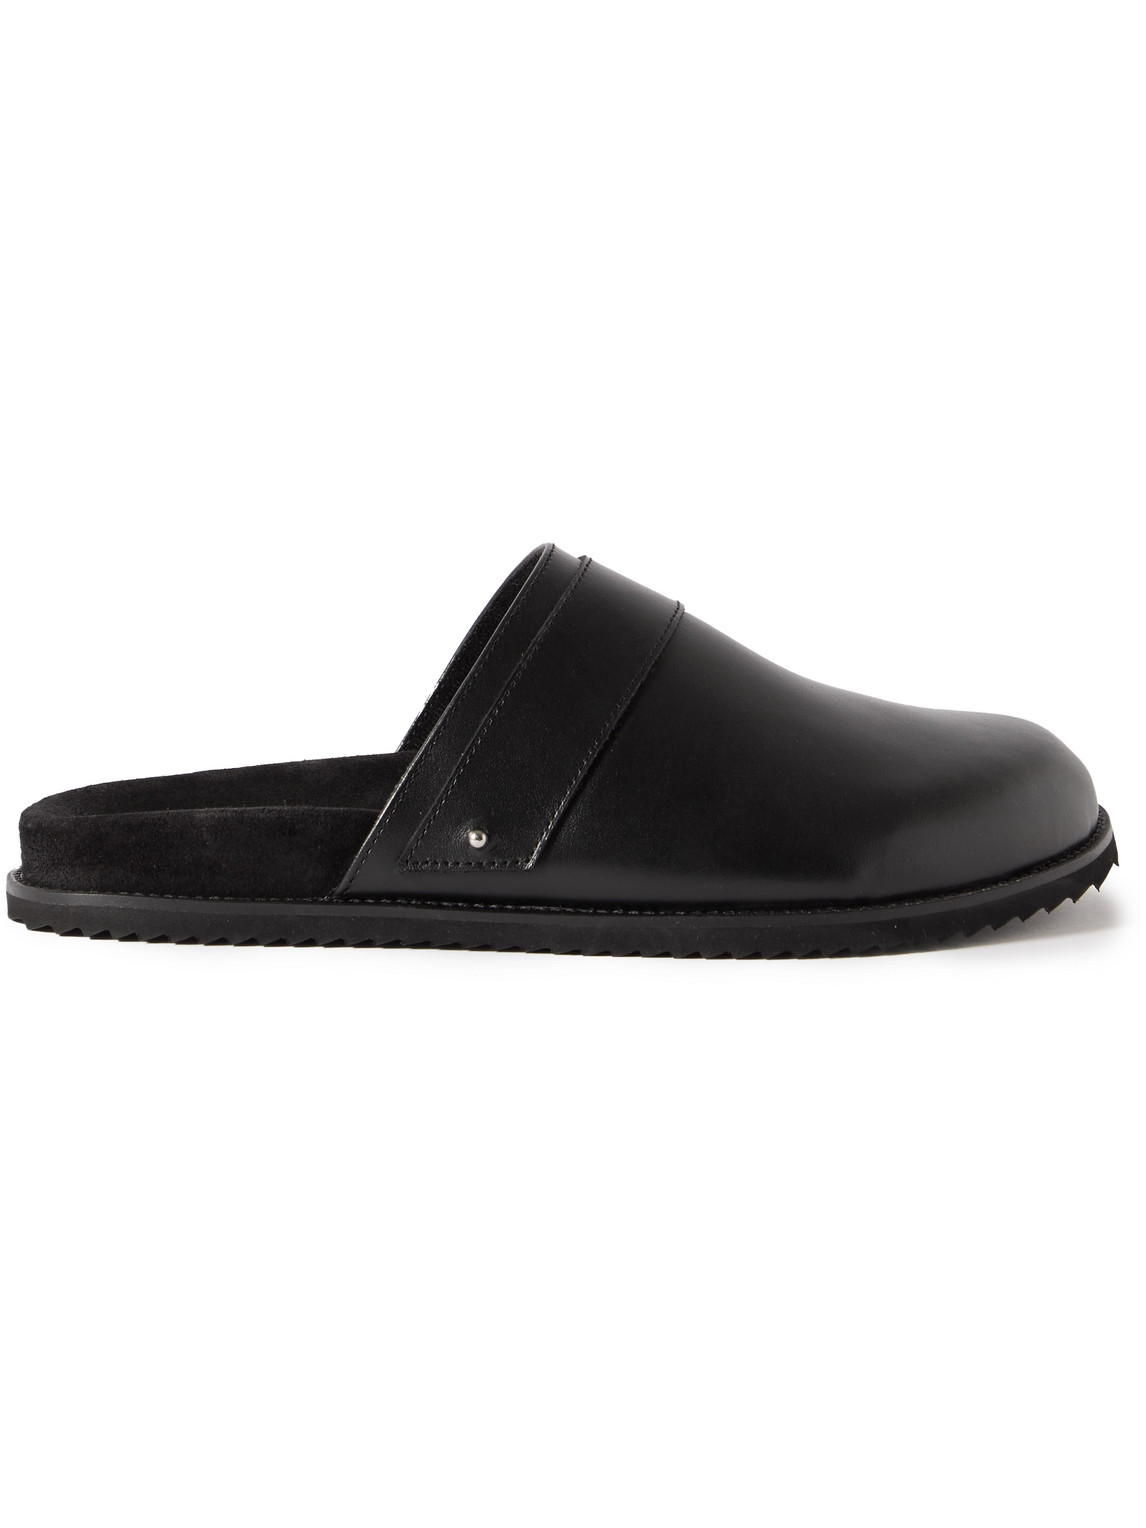 Mr P. Leather Slippers In Black